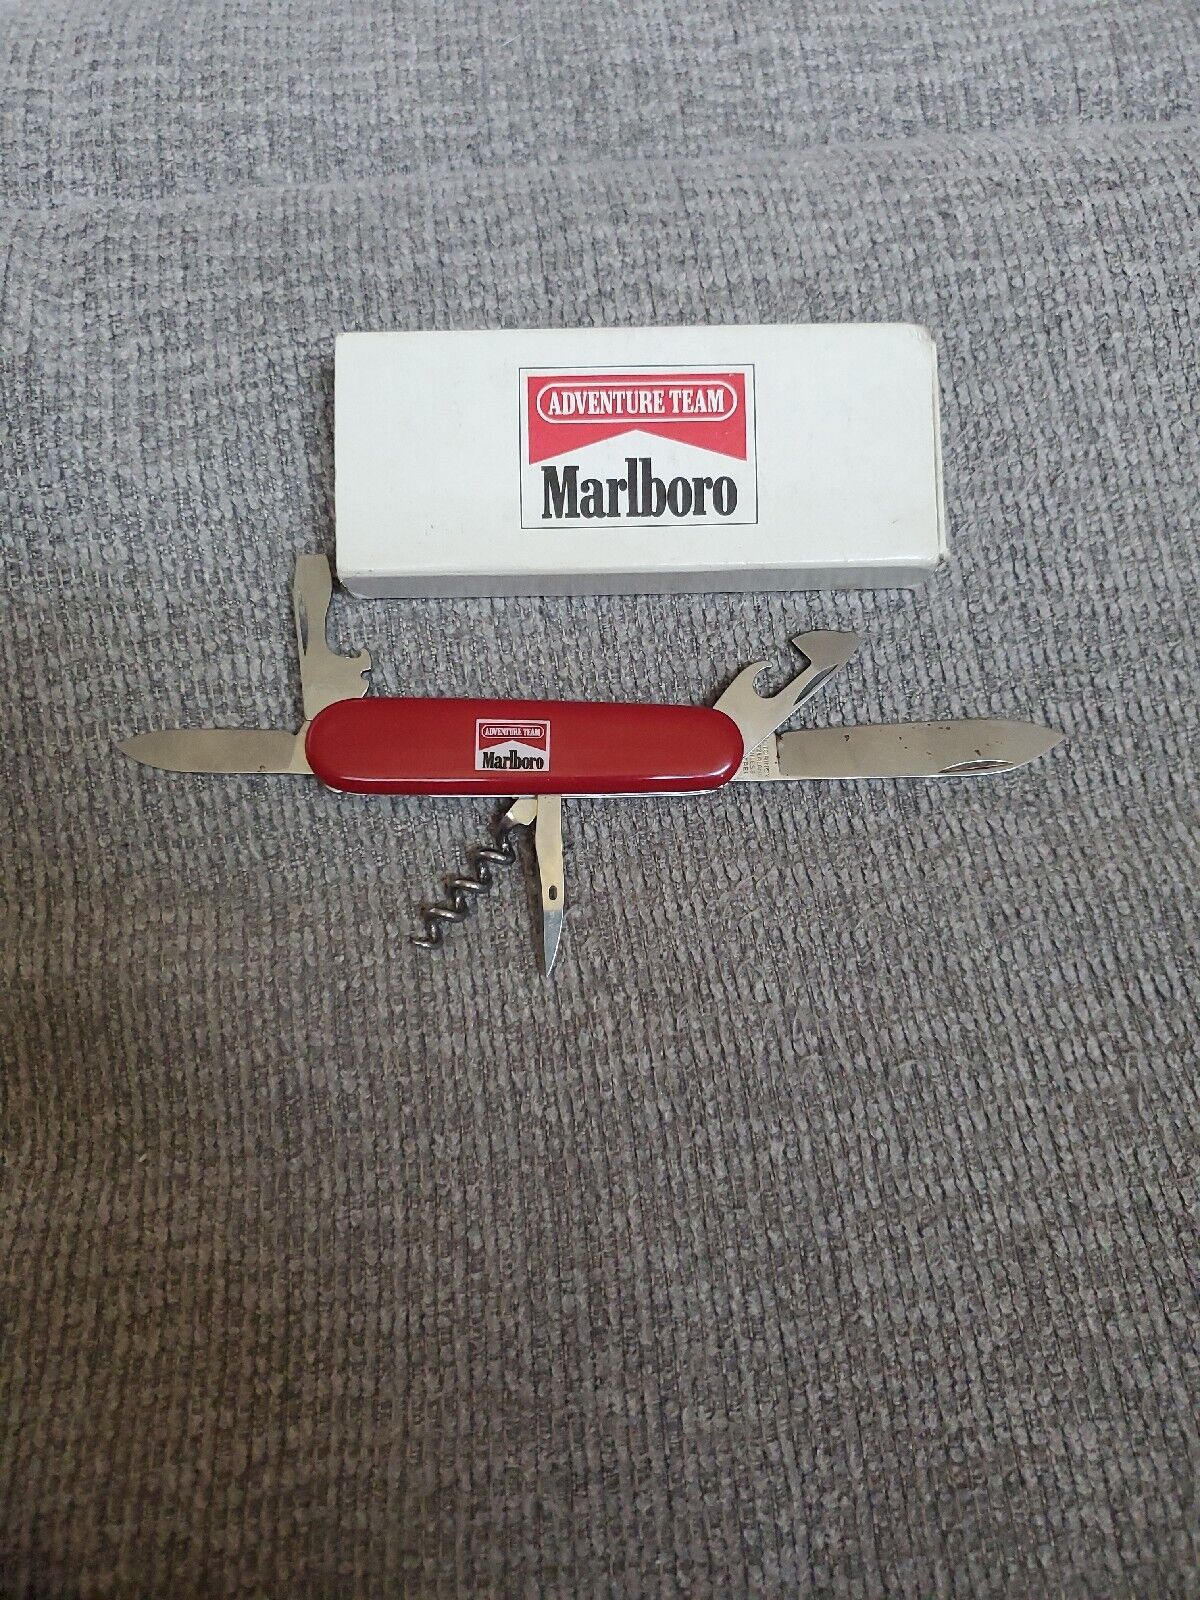 VICTORINOX SWISS ARMY KNIFE OFFICIER SUISSE  MULTI TOOL MARLBORO COLLECTIBLE VNT